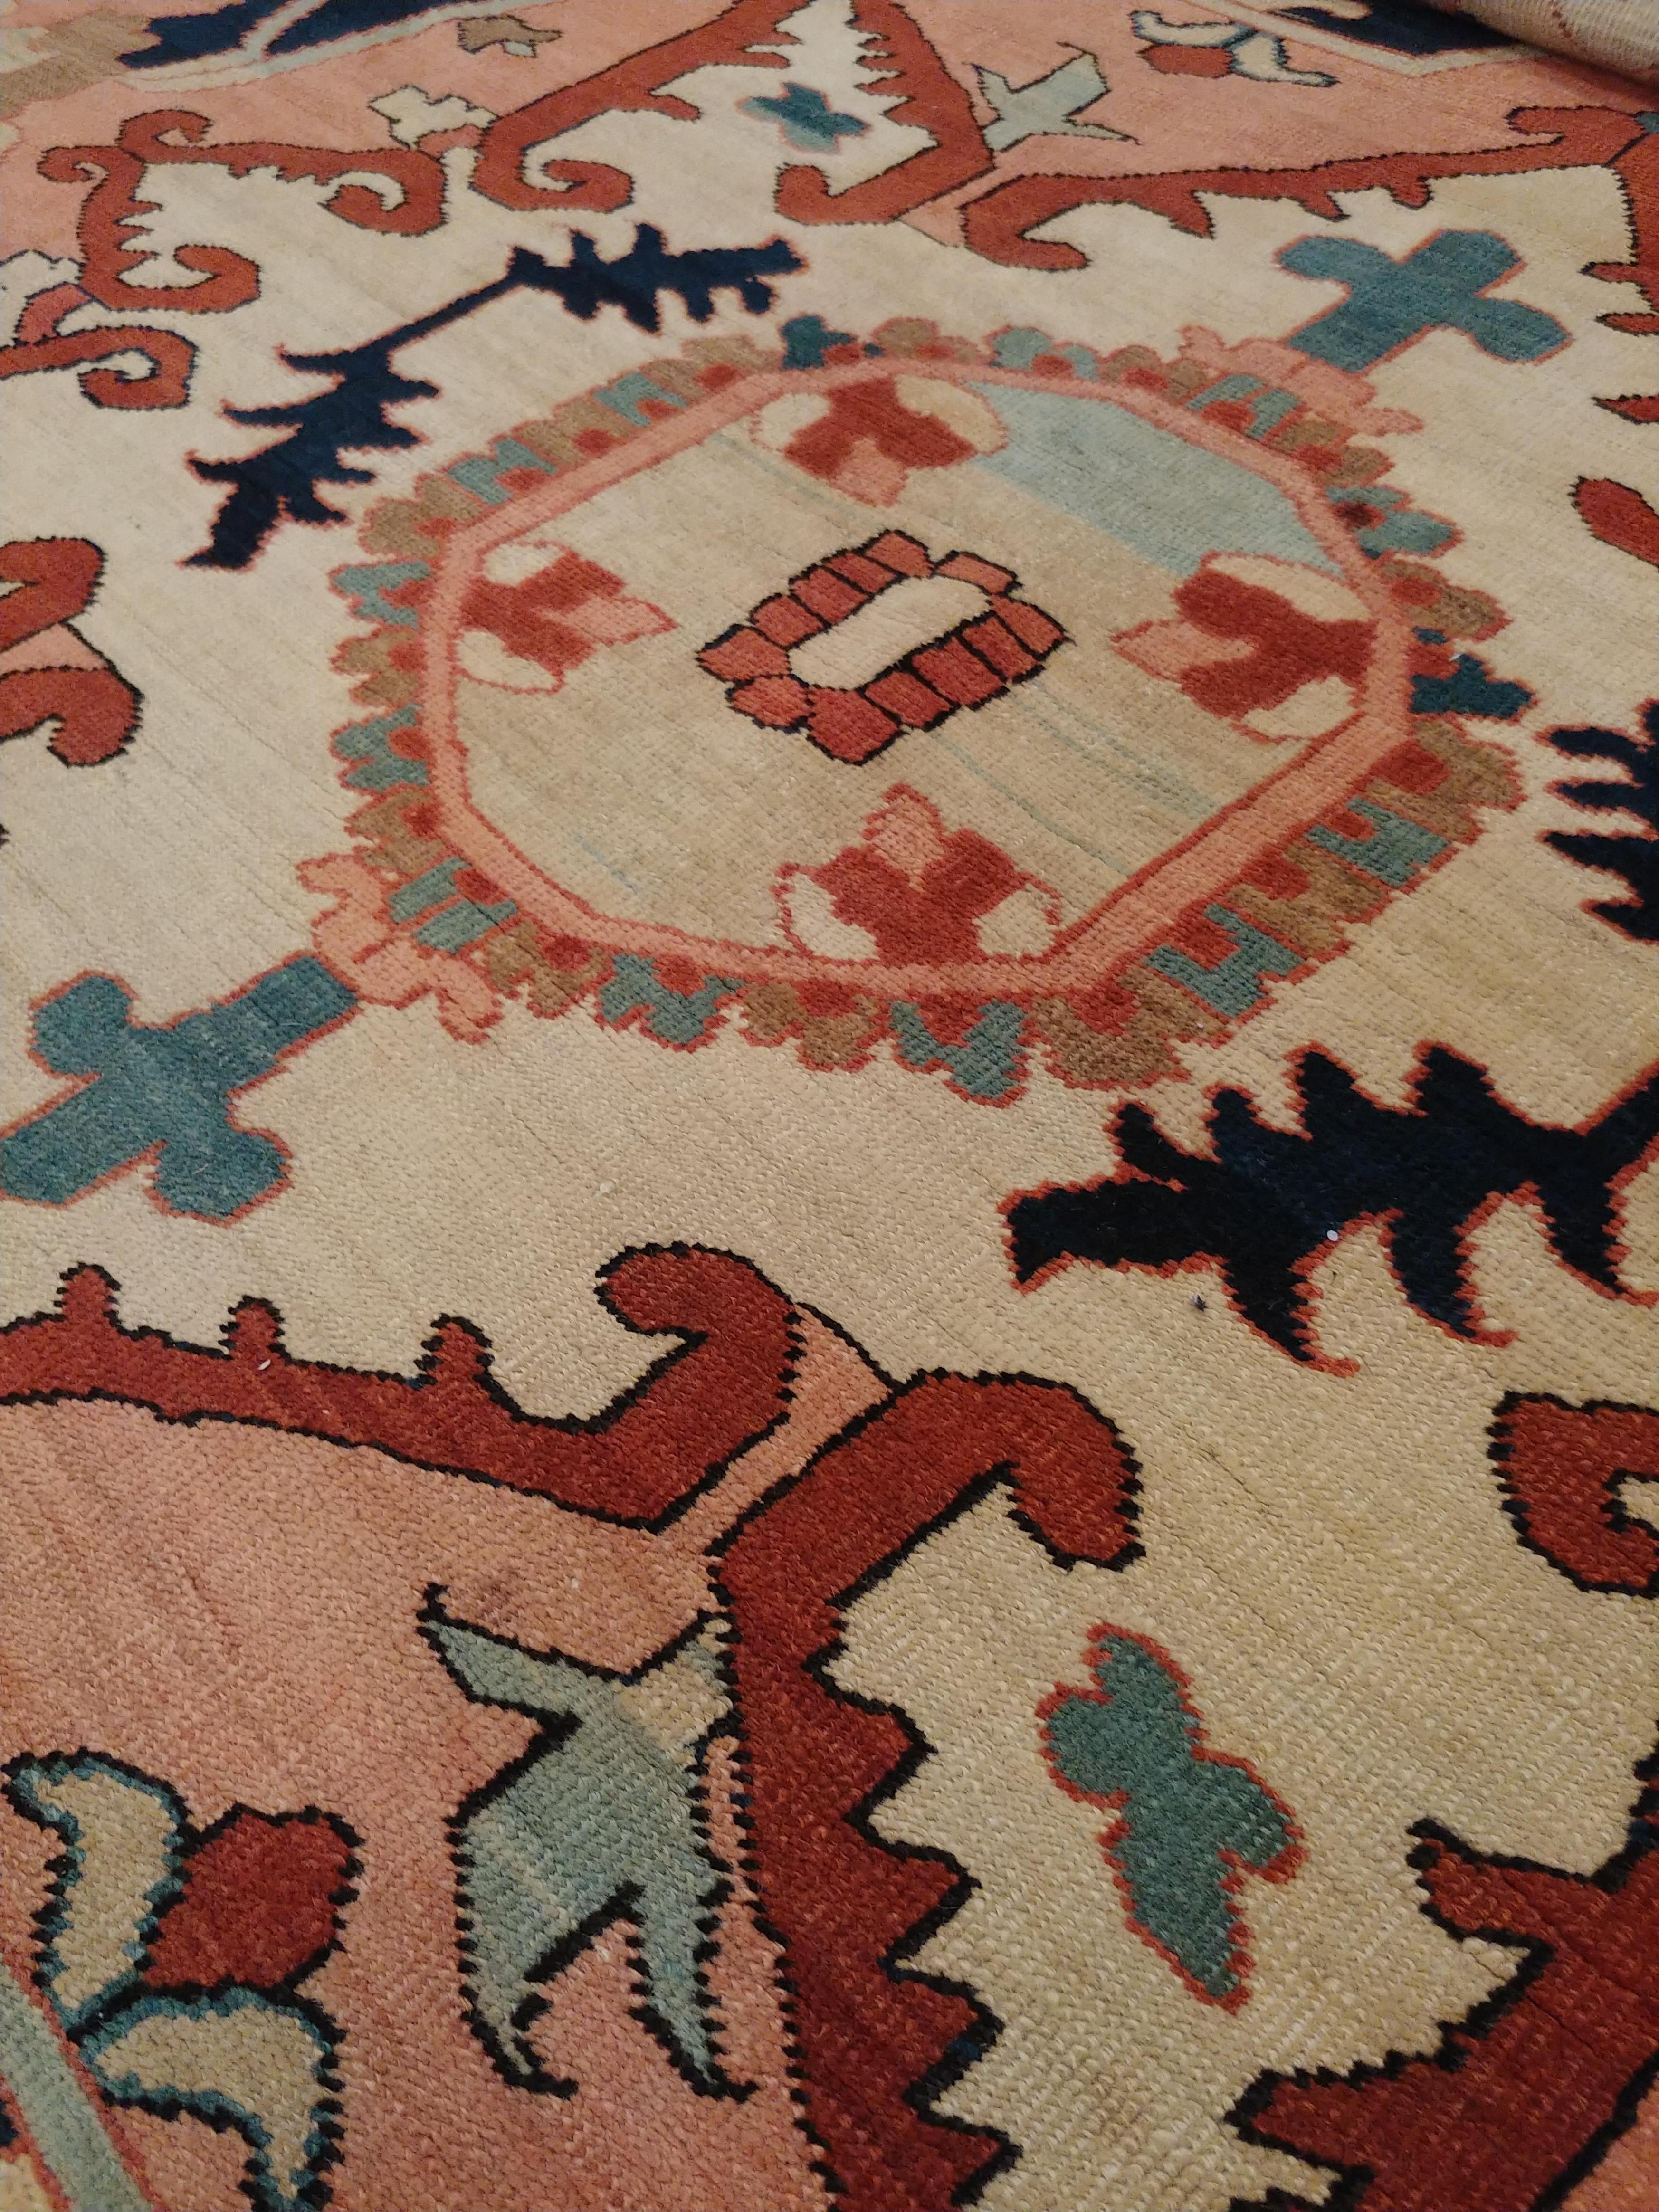 Antique Persian Serapi Carpet, Handmade Wool Oriental Rug, Ivory and Light Blue In Good Condition For Sale In Port Washington, NY